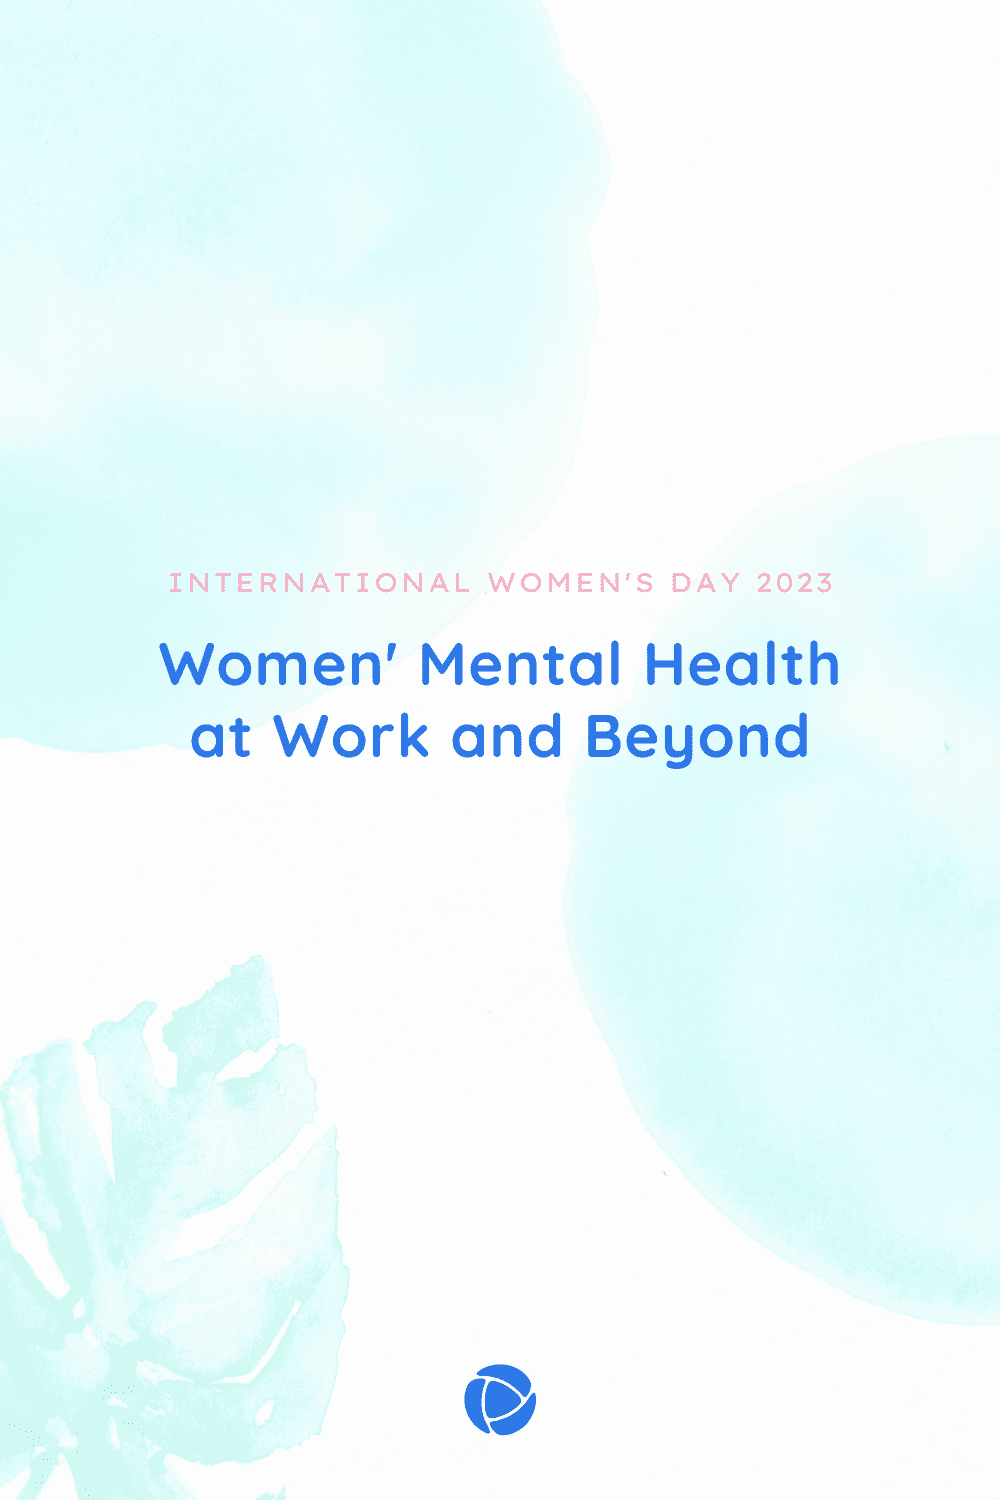 Women’s Mental Health at Work and Beyond